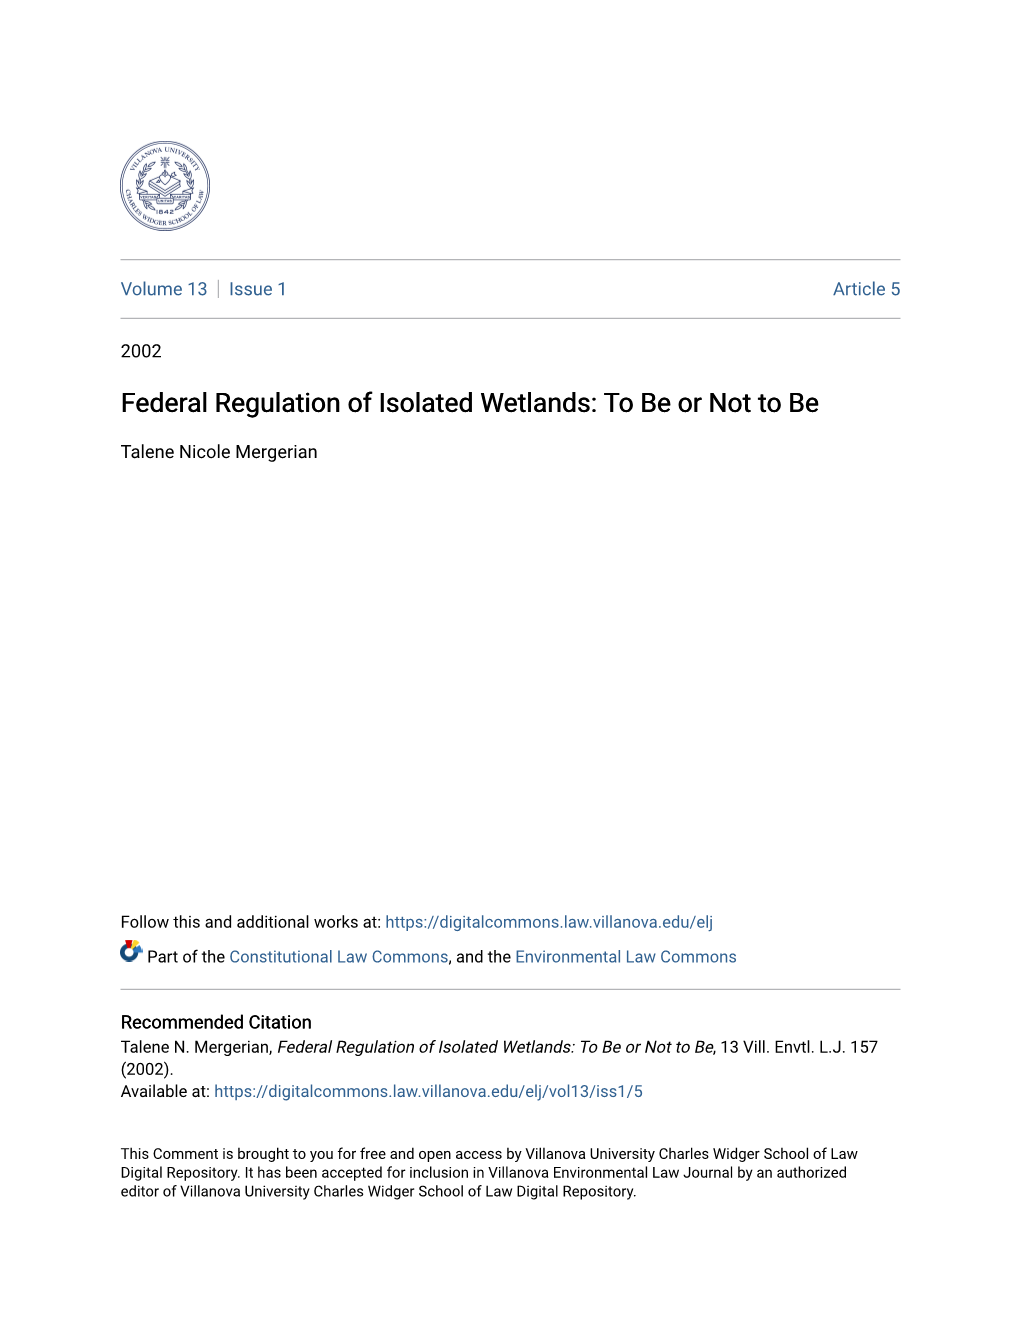 Federal Regulation of Isolated Wetlands: to Be Or Not to Be